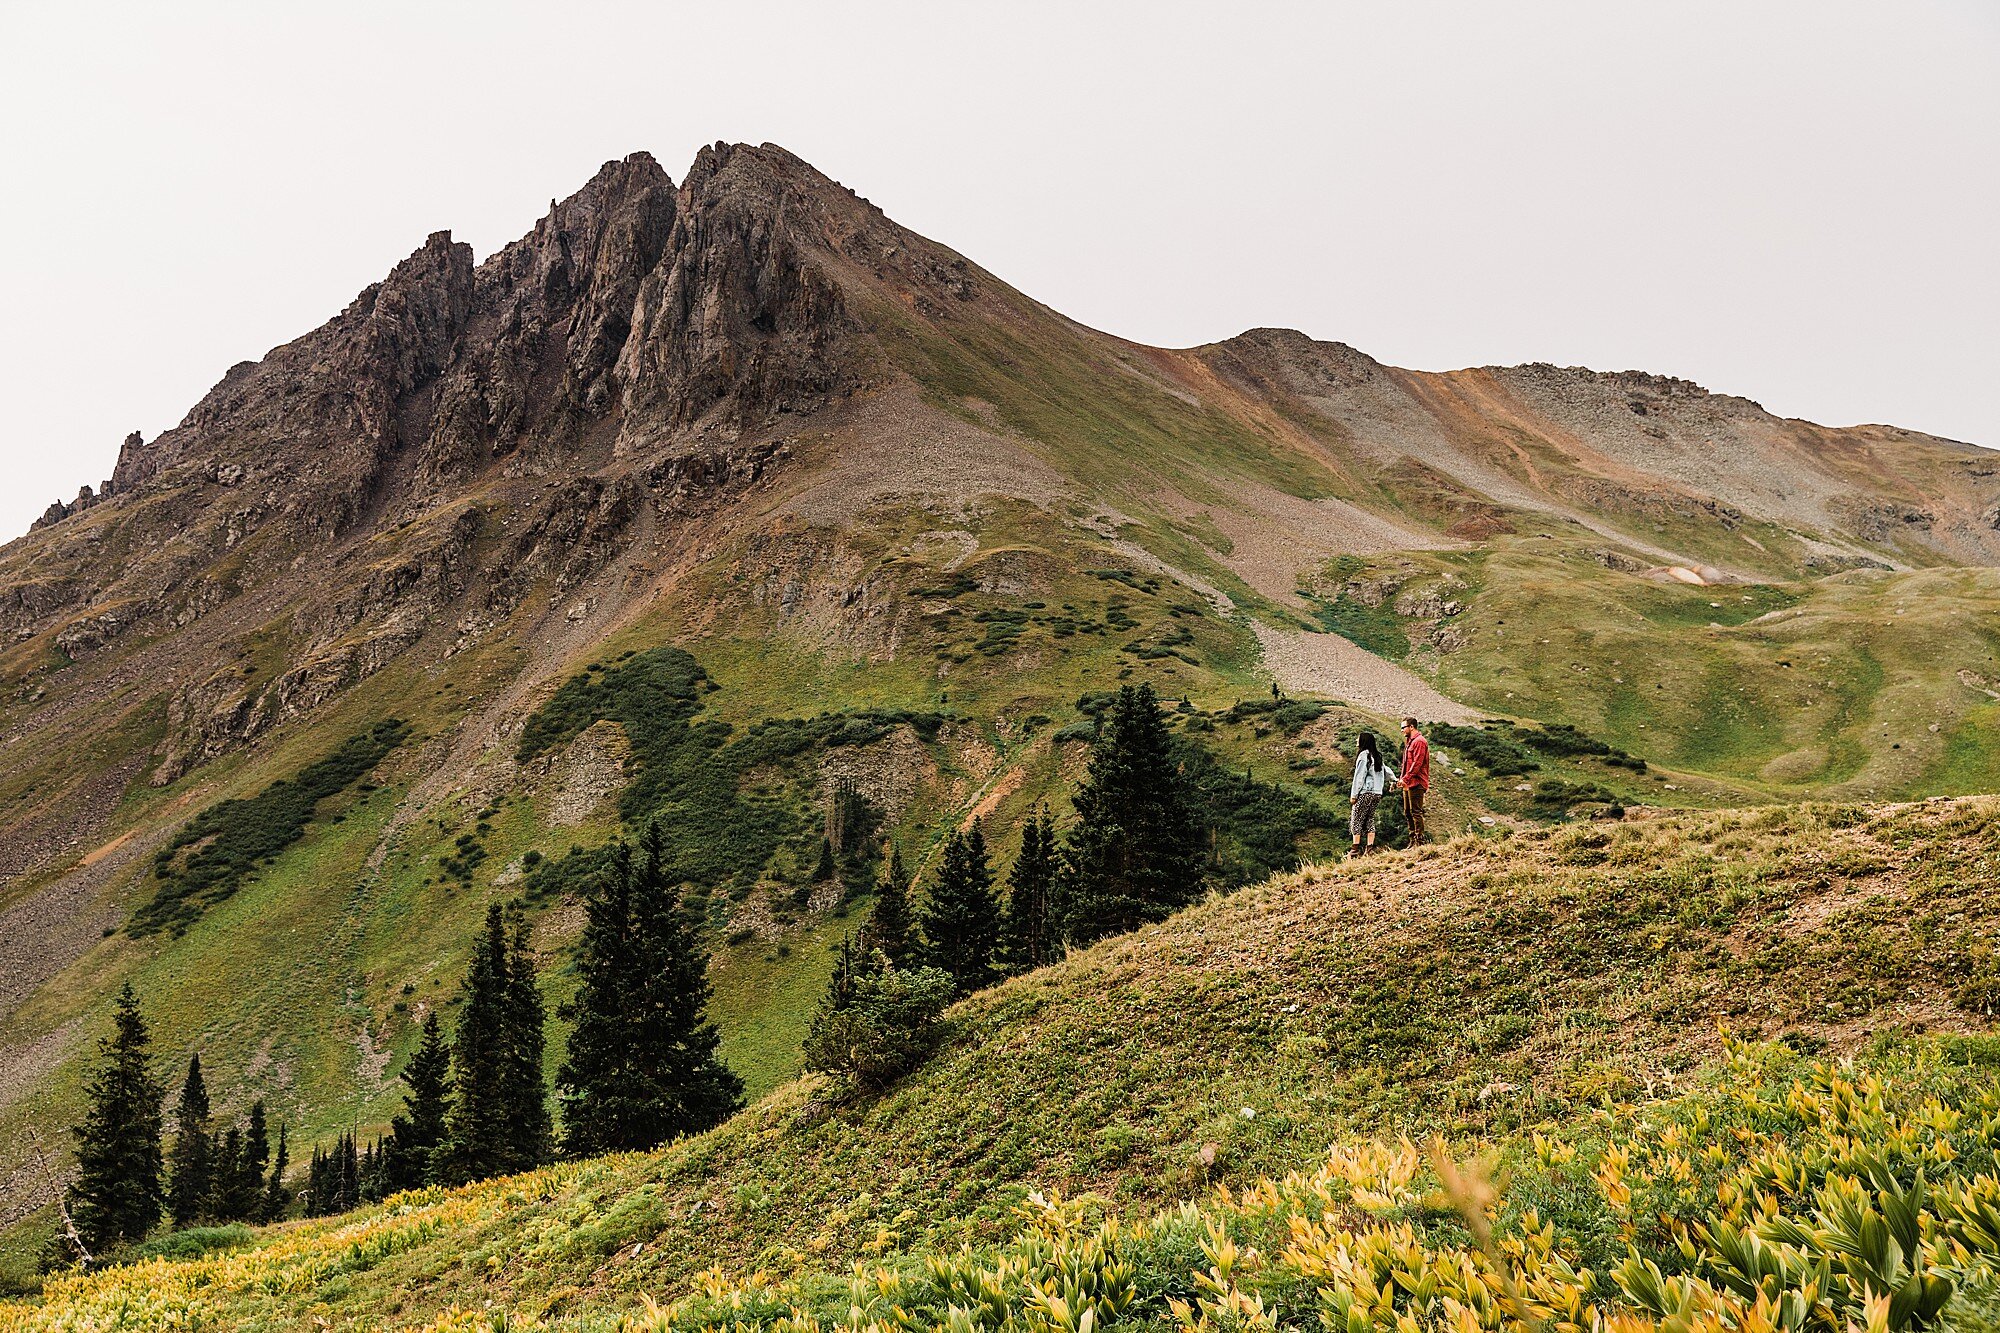 Ouray Colorado Off-Road Adventure Elopement | Vow of the Wild